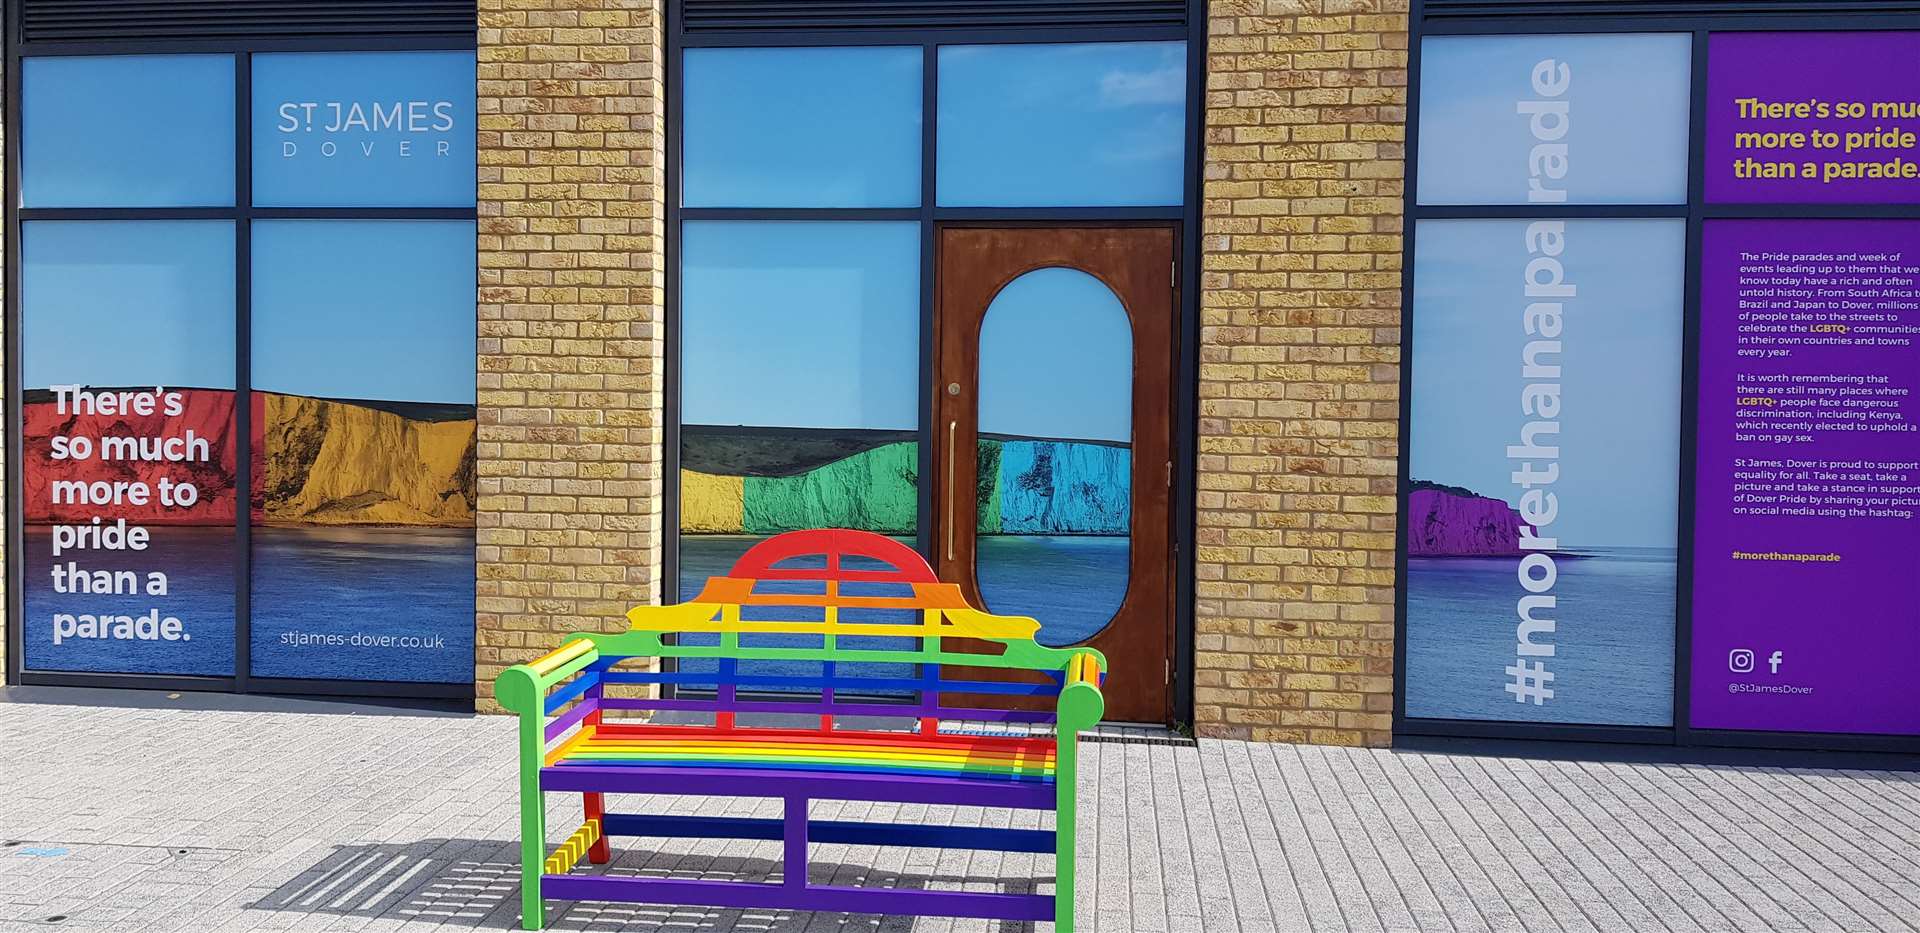 The new Pride bench at St James'. Picture: St James' Dover